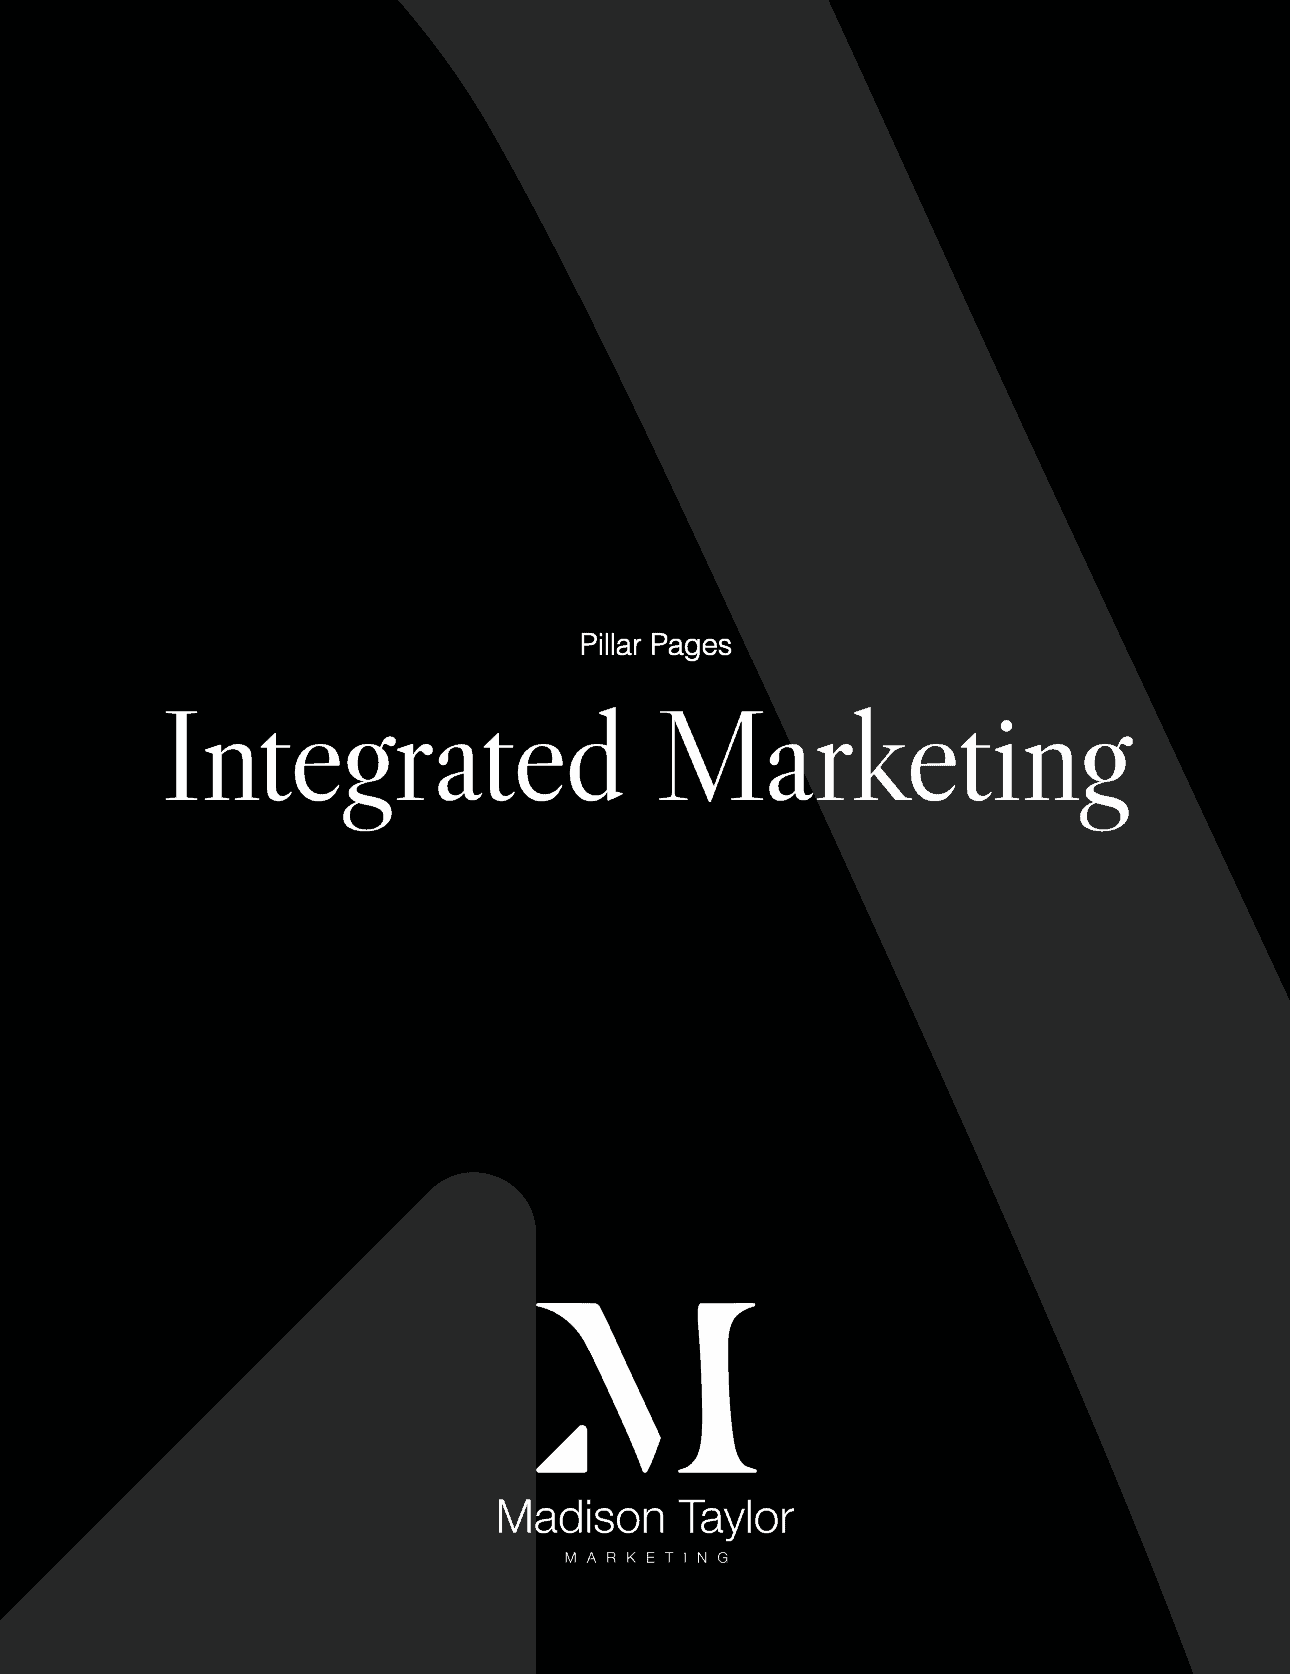 integrated marketing pillar cover featuring the madison taylor marketing logo